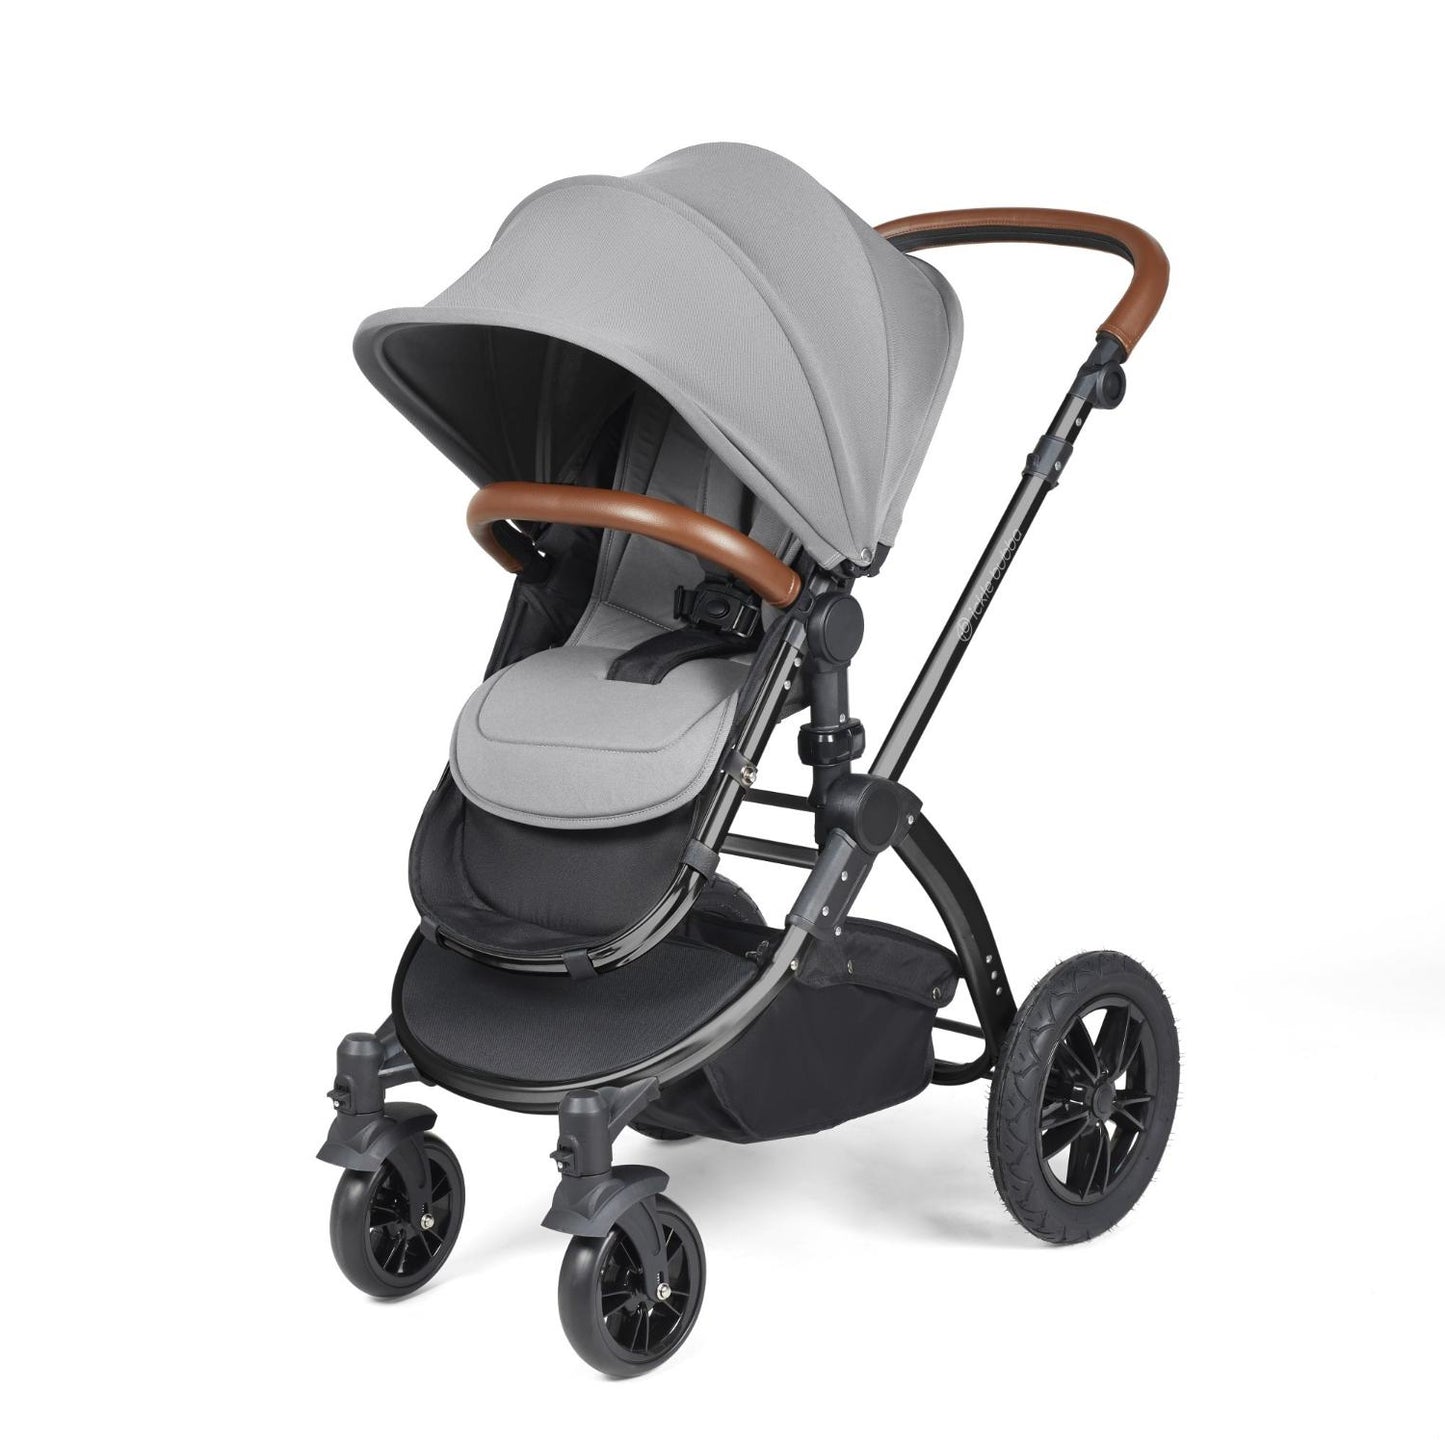 Ickle Bubba Stomp Luxe Pushchair with seat unit attached in Pearl Grey colour with tan handle